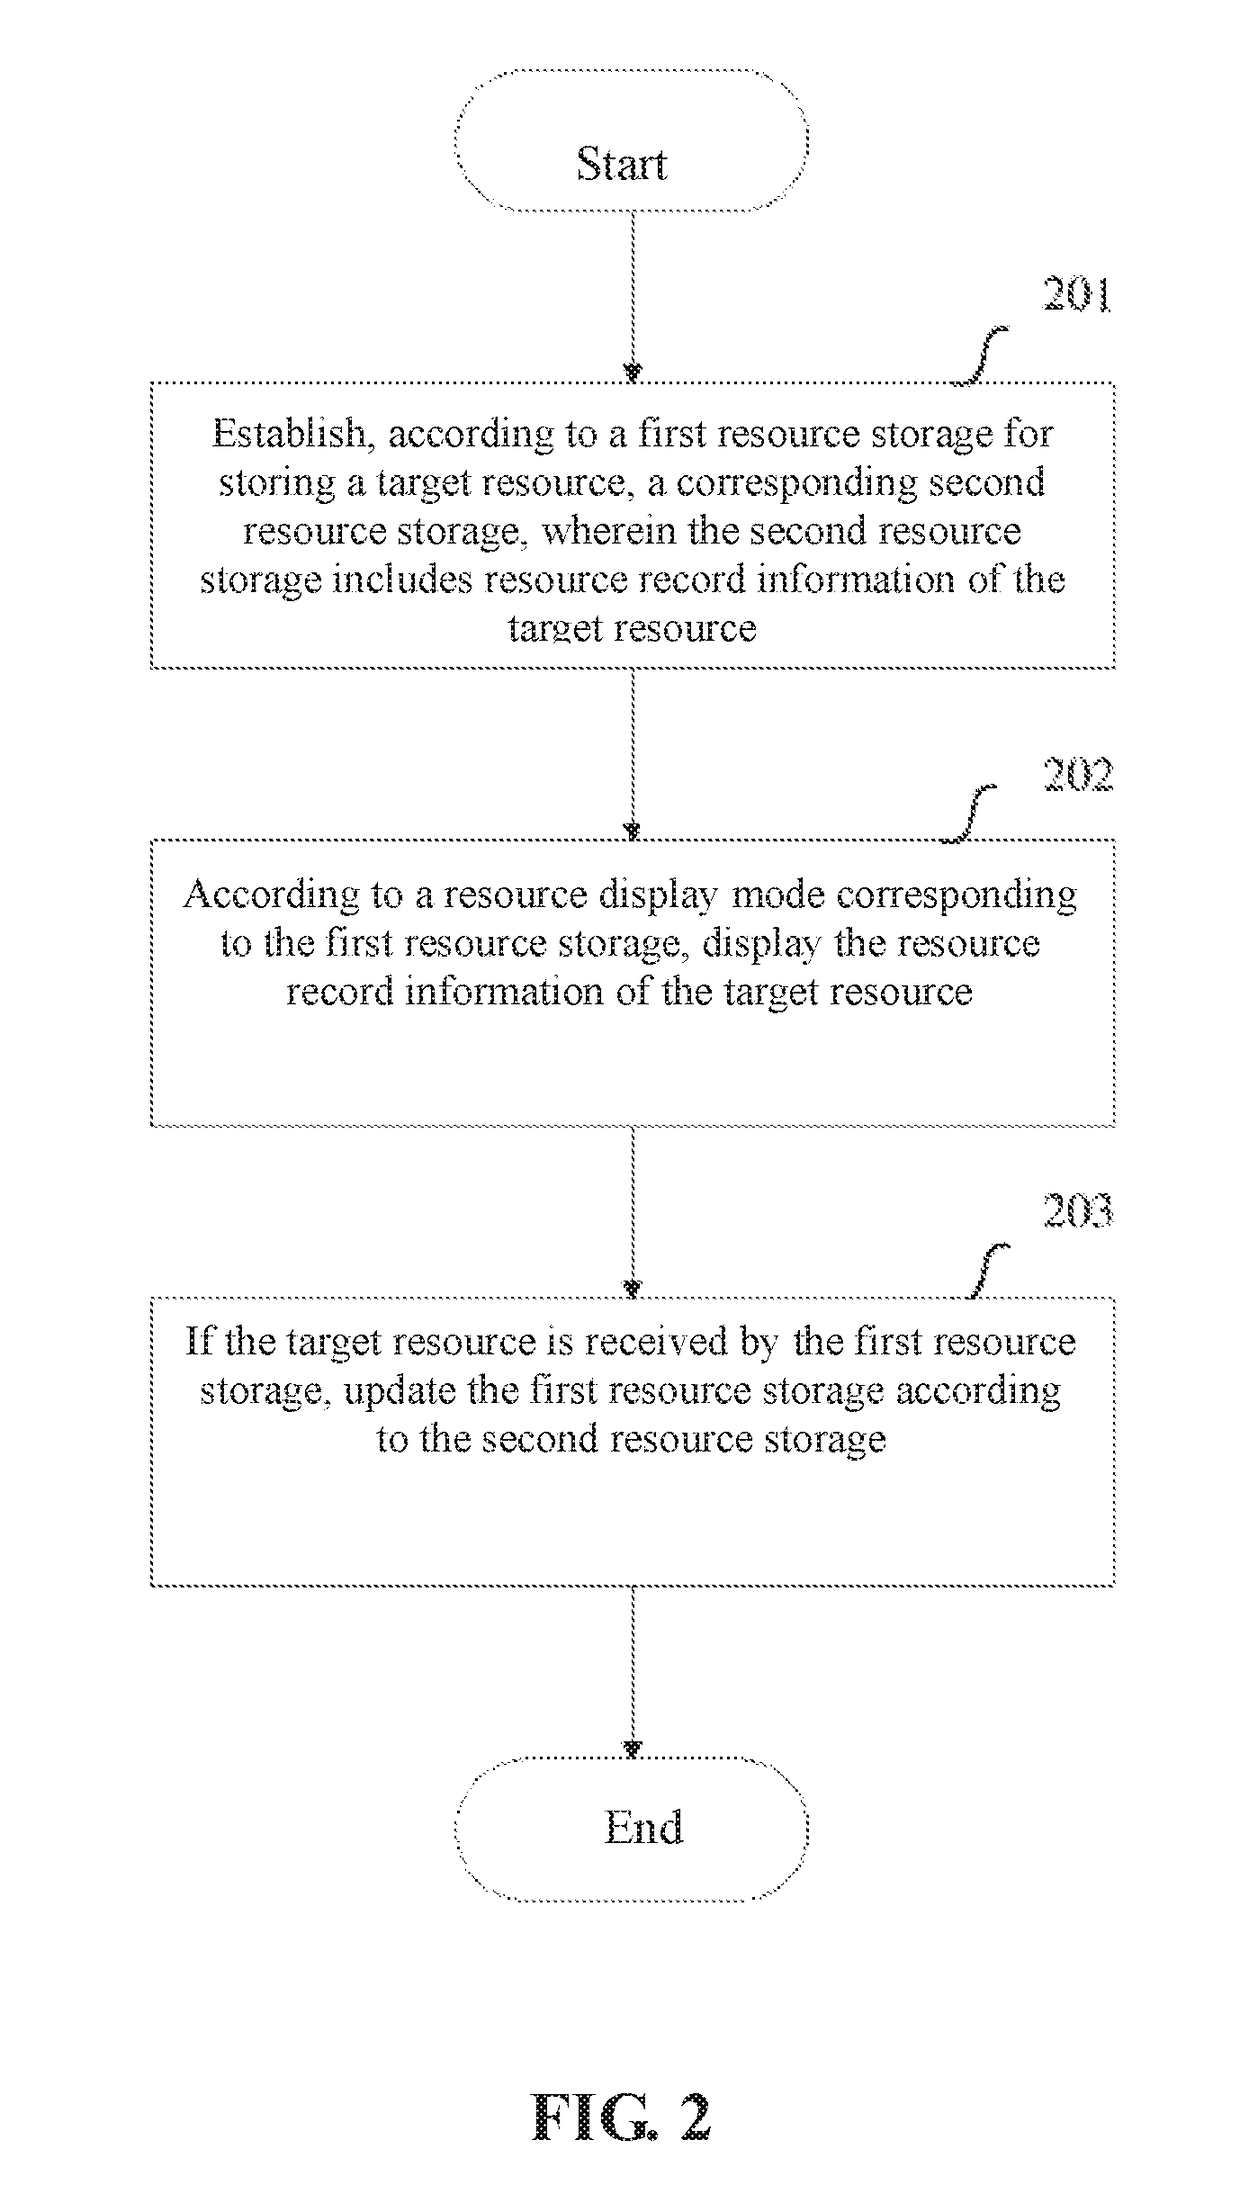 Resource processing method and device